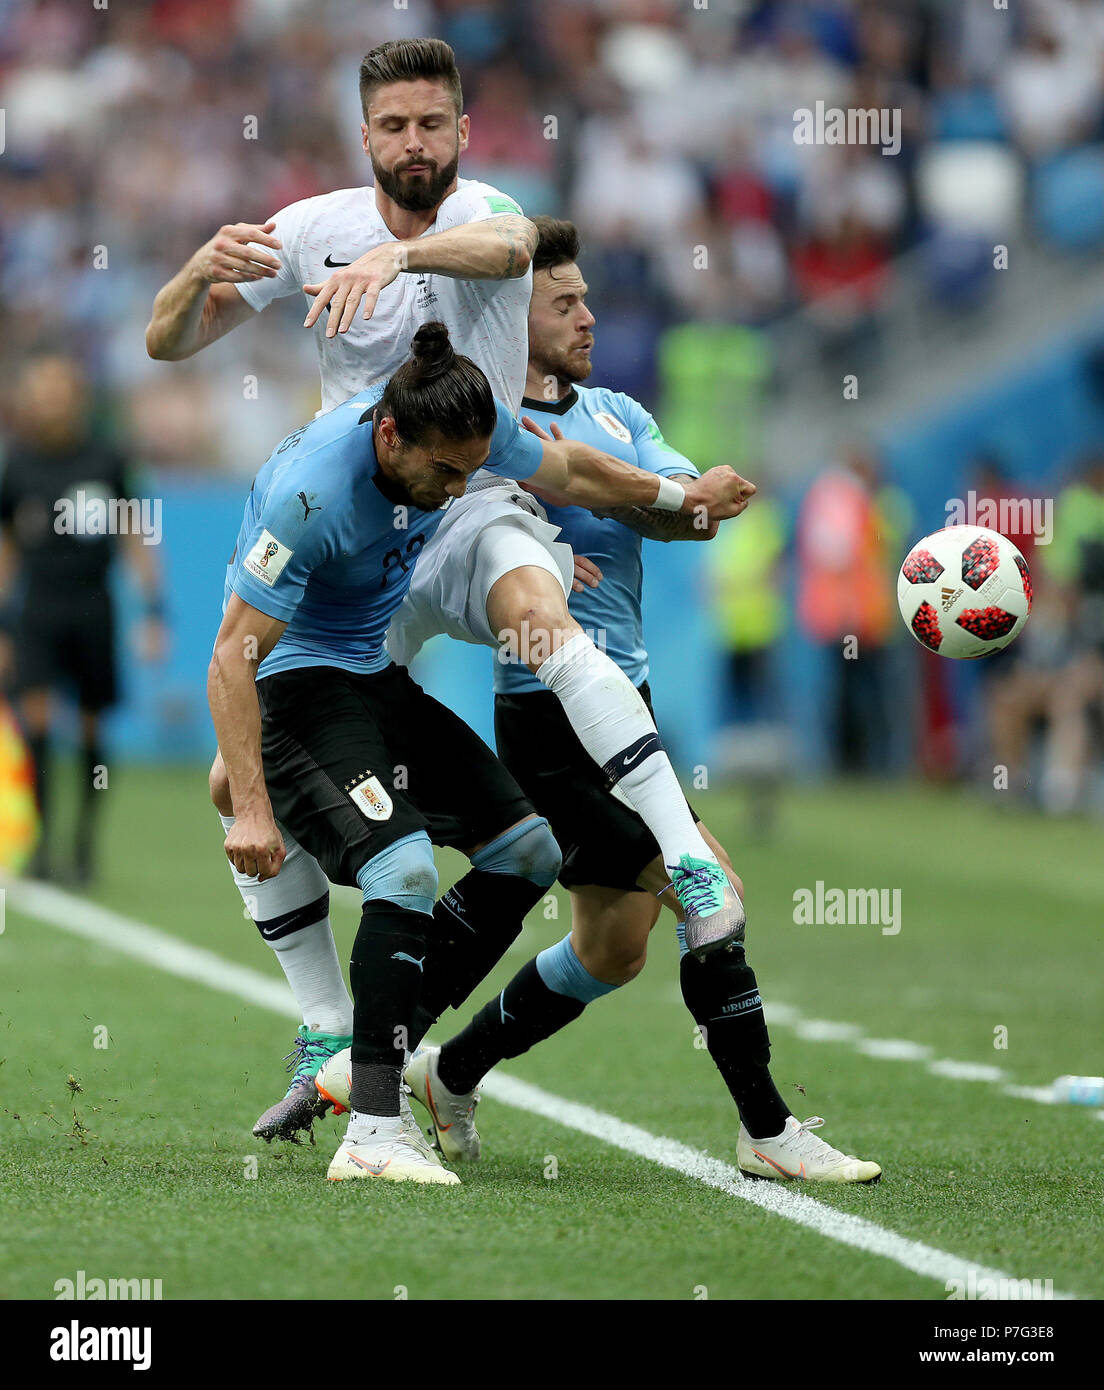 Nizhny Novgorod, Russia. 6th July, 2018. Olivier Giroud (top) of France vies with Martin Caceres (L bottom) of Uruguay during the 2018 FIFA World Cup quarter-final match between Uruguay and France in Nizhny Novgorod, Russia, July 6, 2018. Credit: Fei Maohua/Xinhua/Alamy Live News Stock Photo